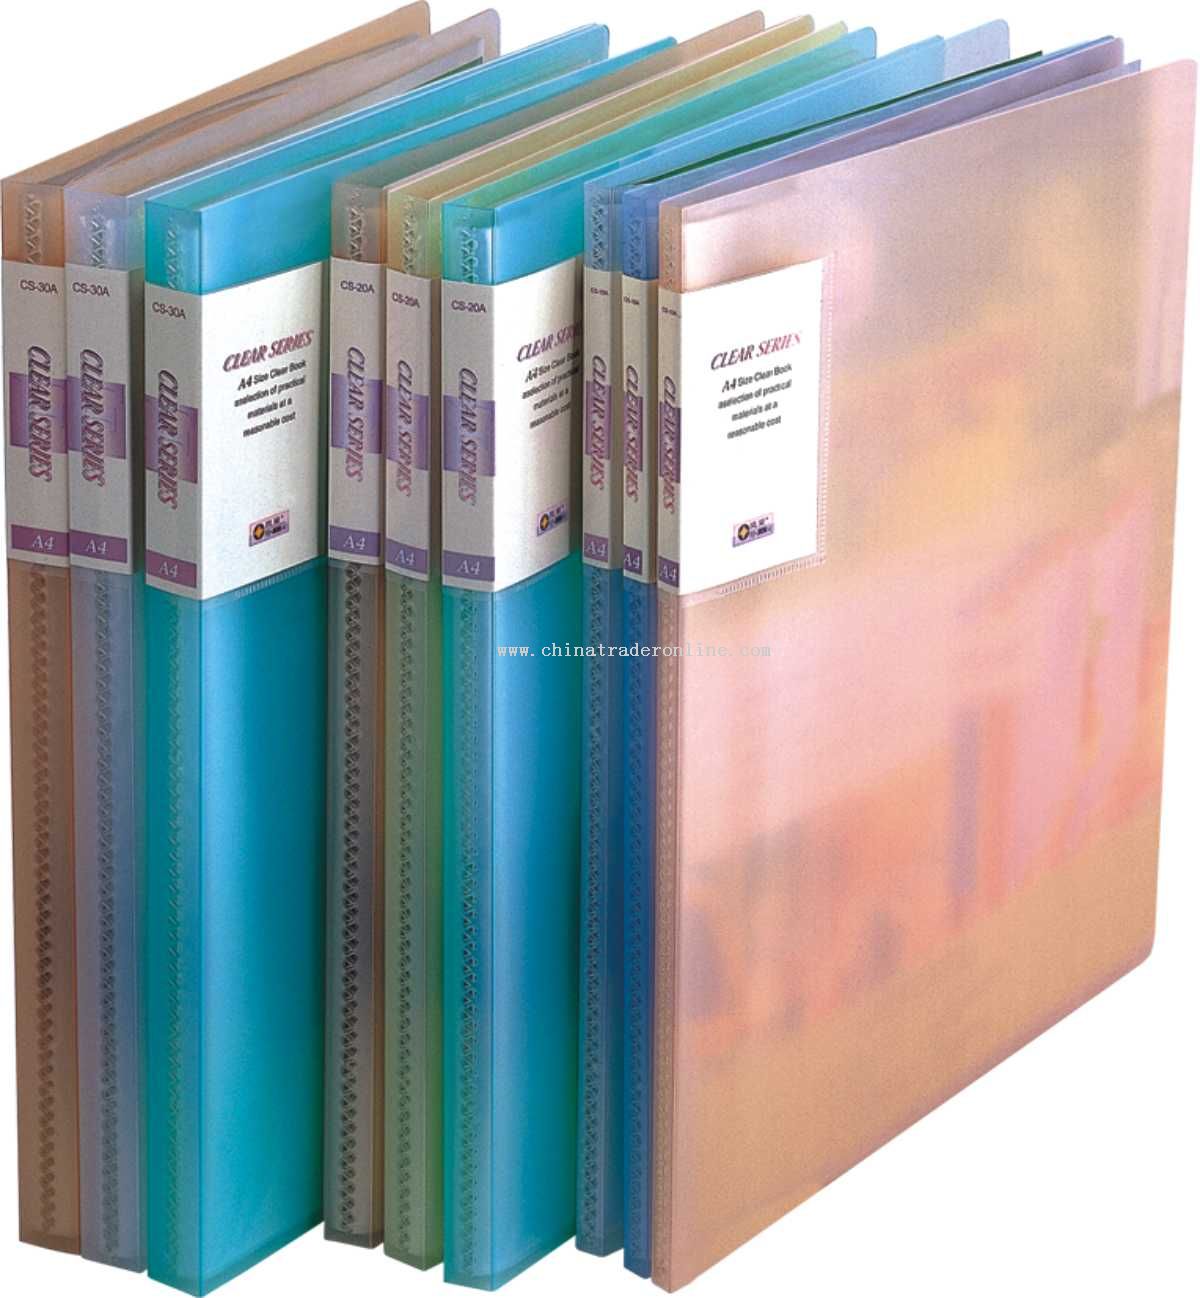 Clear display book (10-30 inner bag) from China